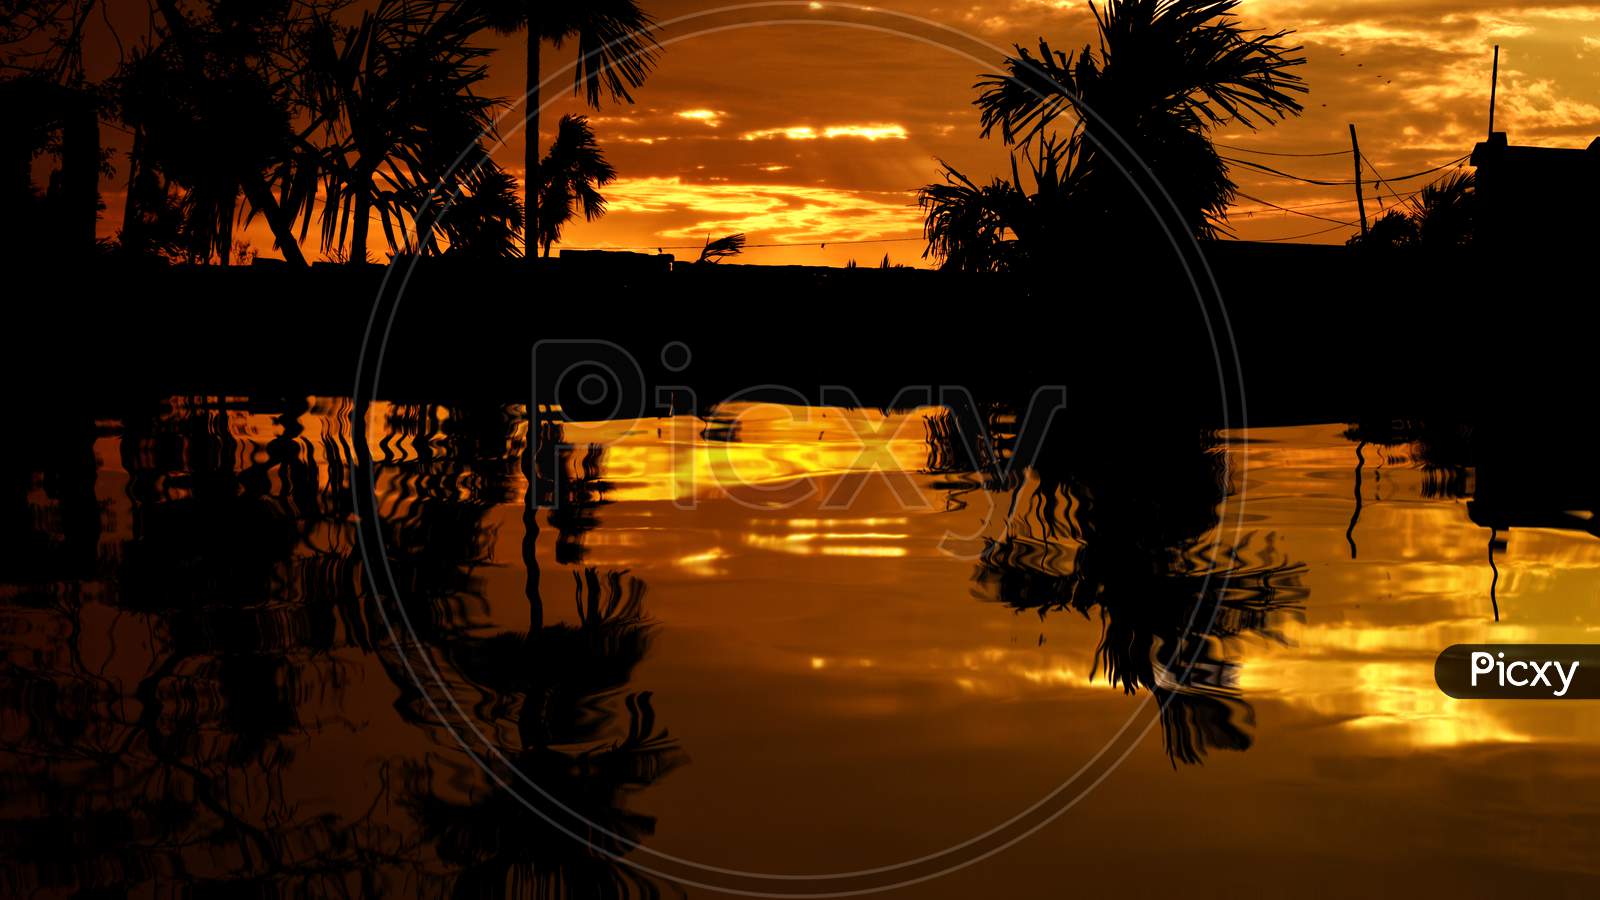 Beautiful Landscape of Illuminated Colorful Sky at Sunset, Reflection on Lake Water After Rain in Afternoon. All Are Black in Shadow And Bright Yellow Clouds on The Sky by The Last Sunshine of Day.